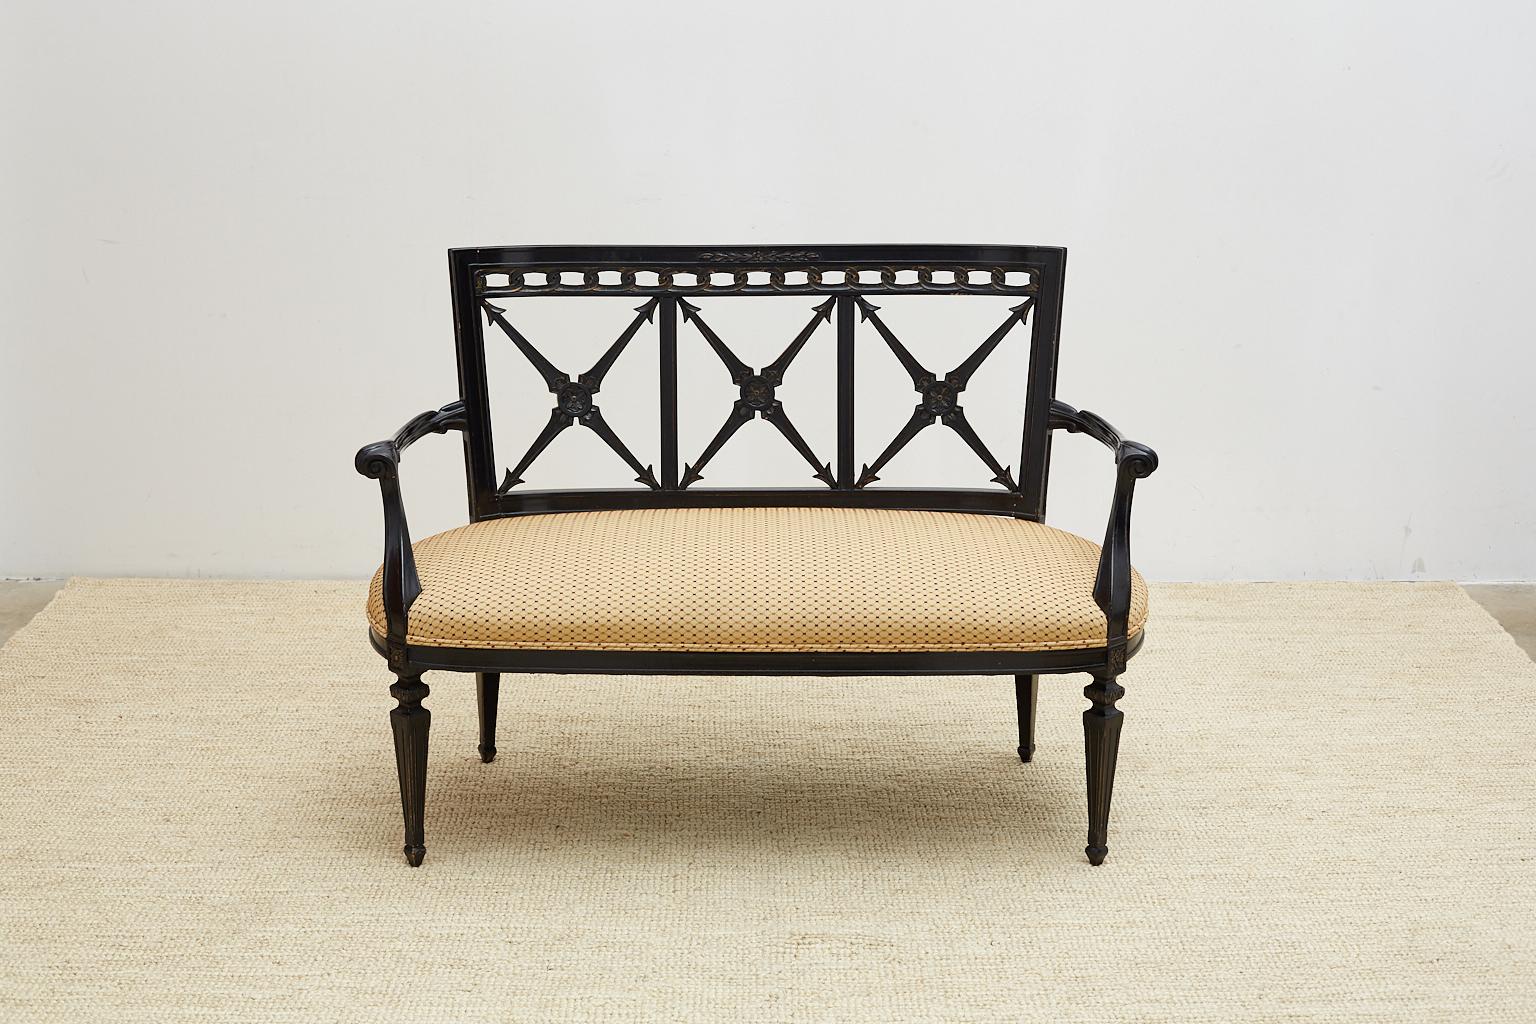 Dramatic carved black lacquer settee or bench in the neoclassical taste. Features a square back beautifully carved with neoclassical motifs rising above an oval seat with curved arms. The frame is supported by tapered legs that are reeded. The light